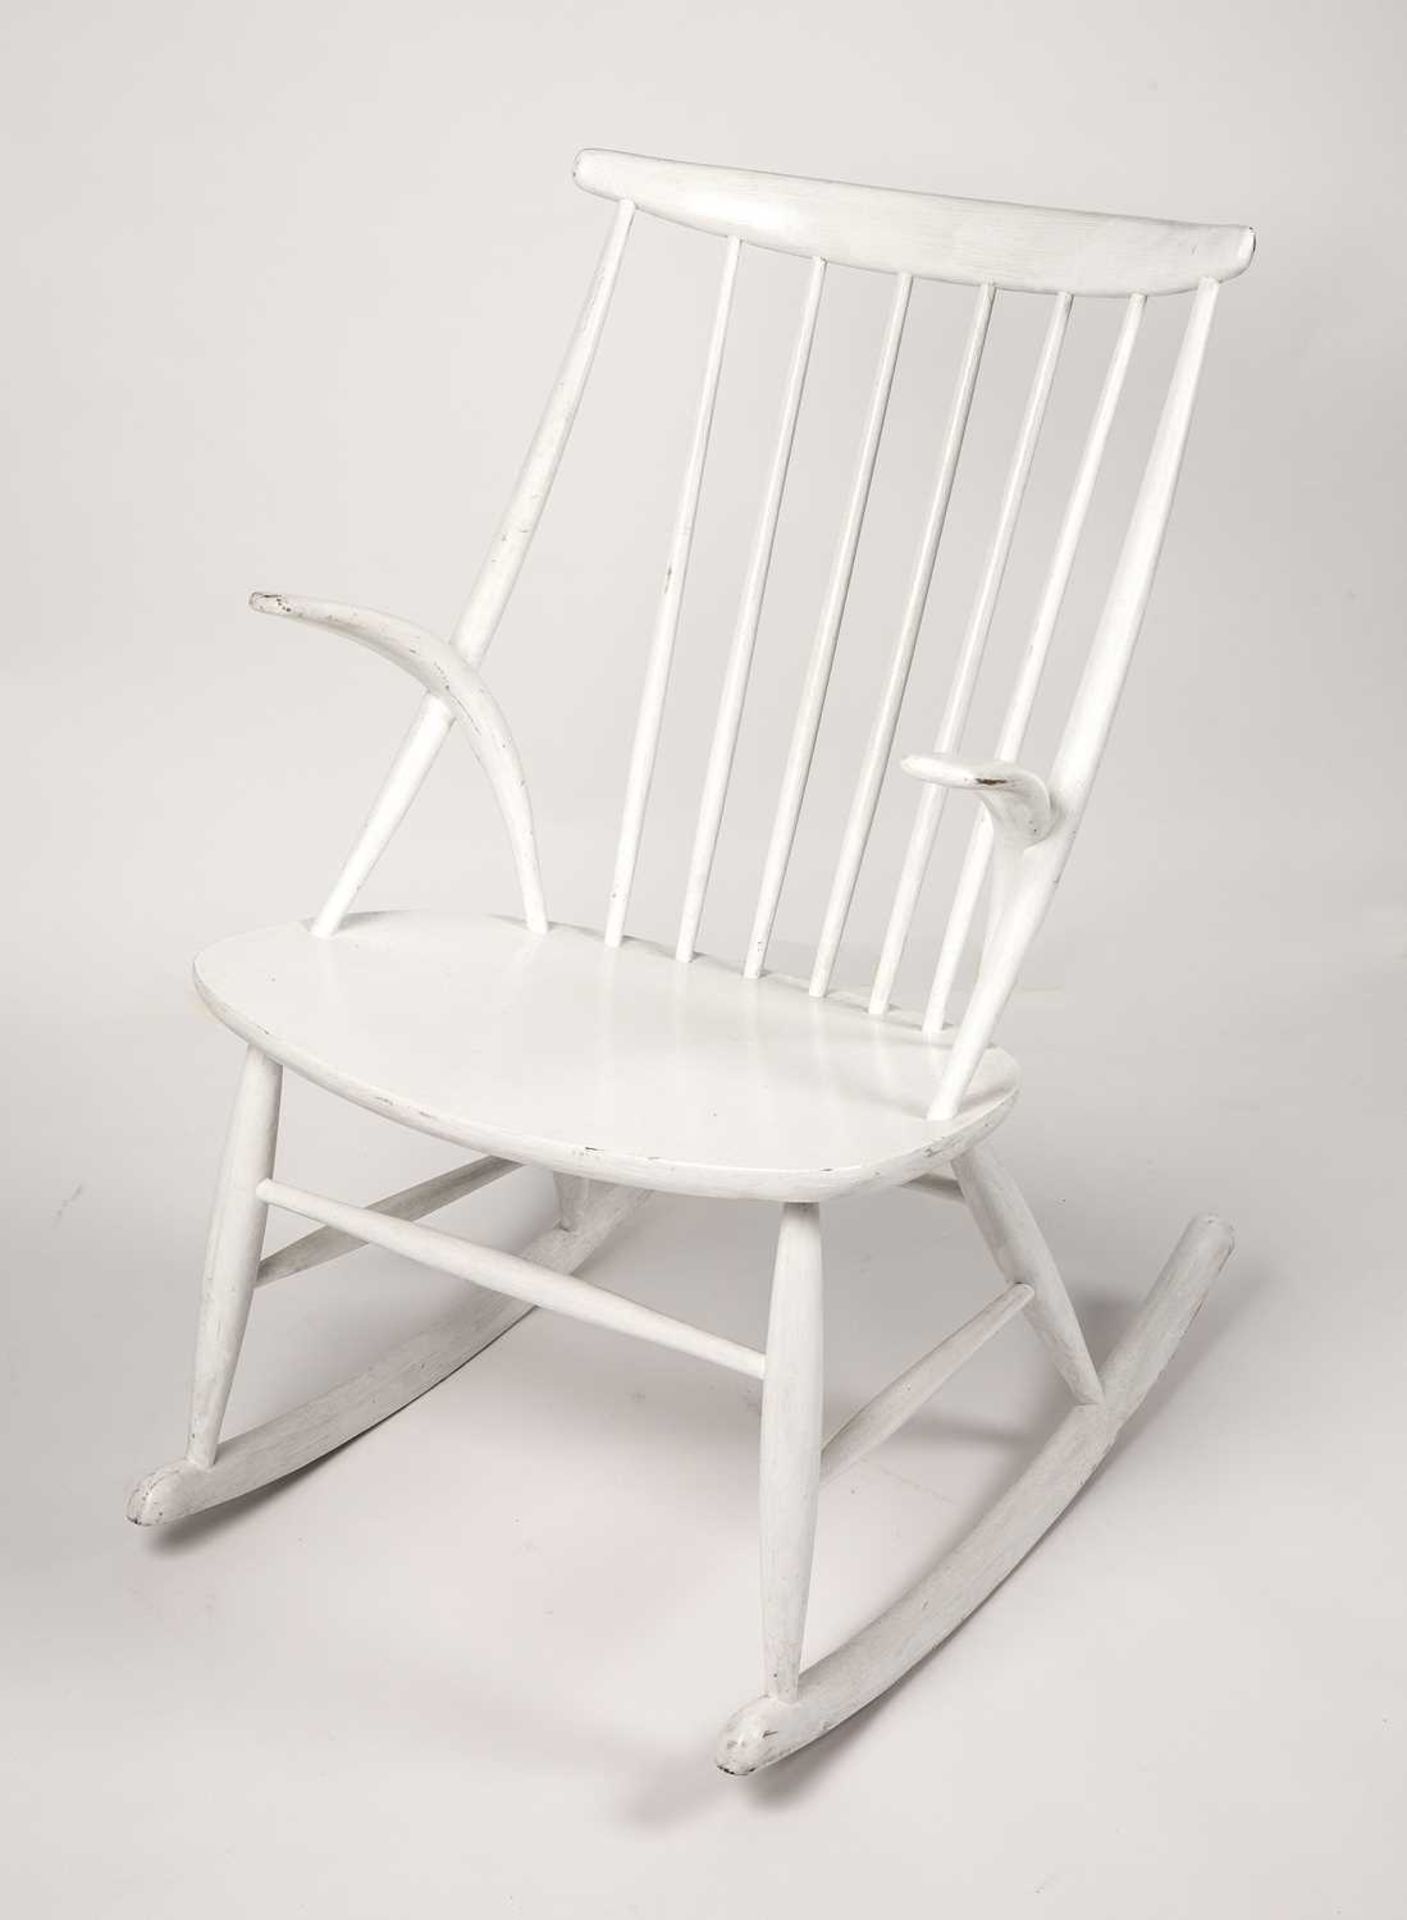 Illum Wikkelso for Neil Eilersen Rocking chair, designed in 1958 white painted wood 95cm high, 55cm - Image 4 of 4